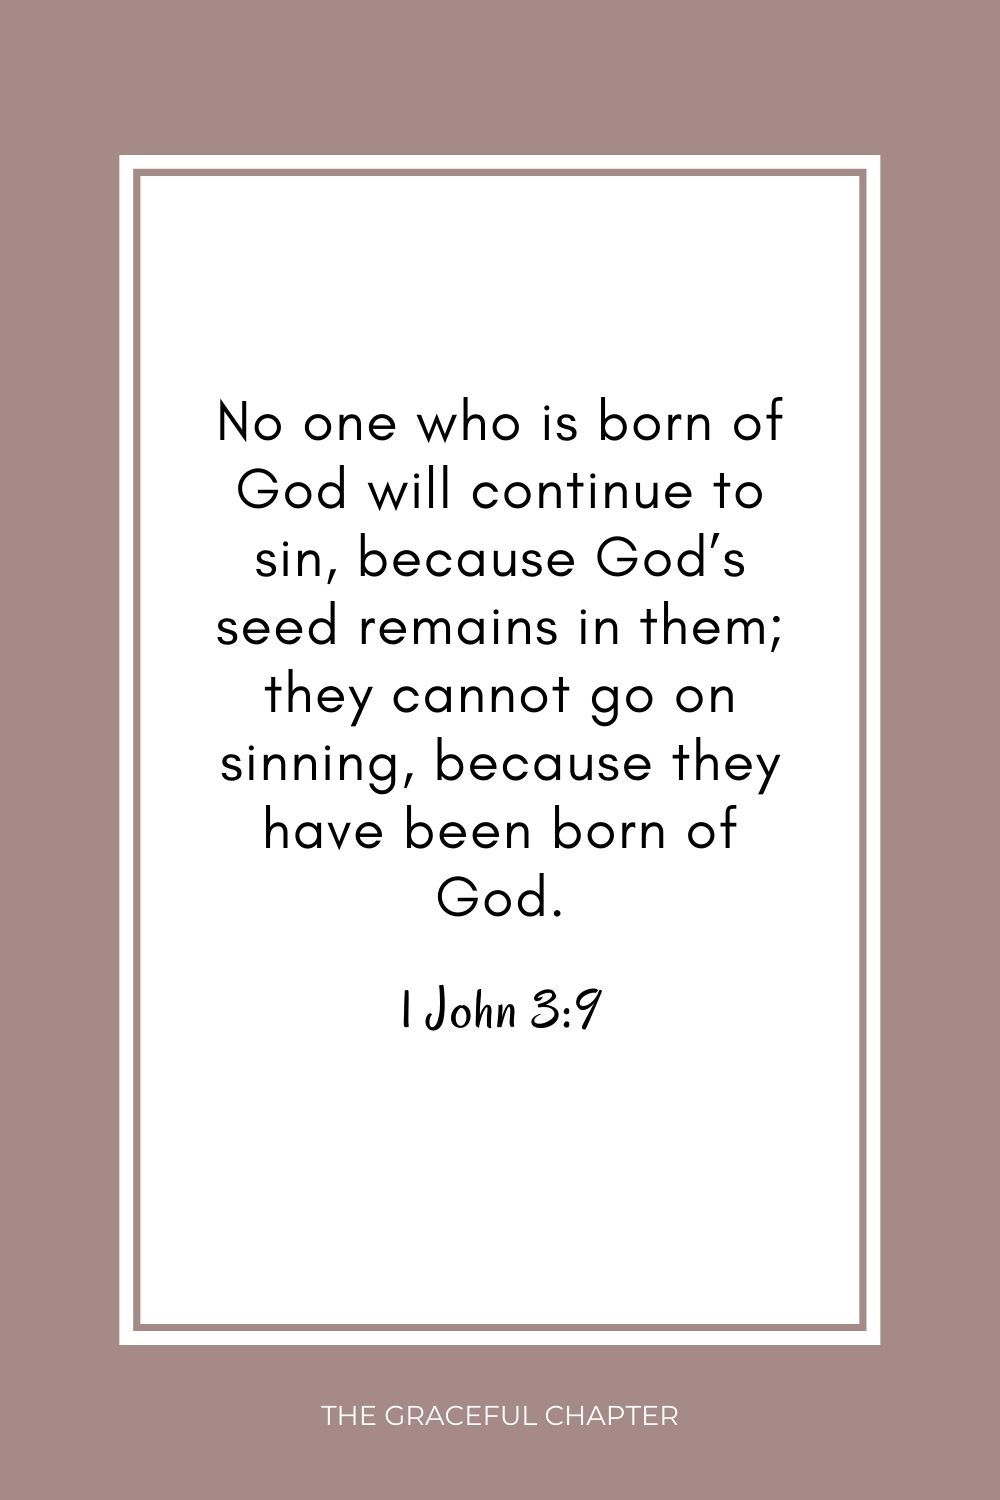 No one who is born of God will continue to sin, because God’s seed remains in them; they cannot go on sinning, because they have been born of God. 1 John 3:9